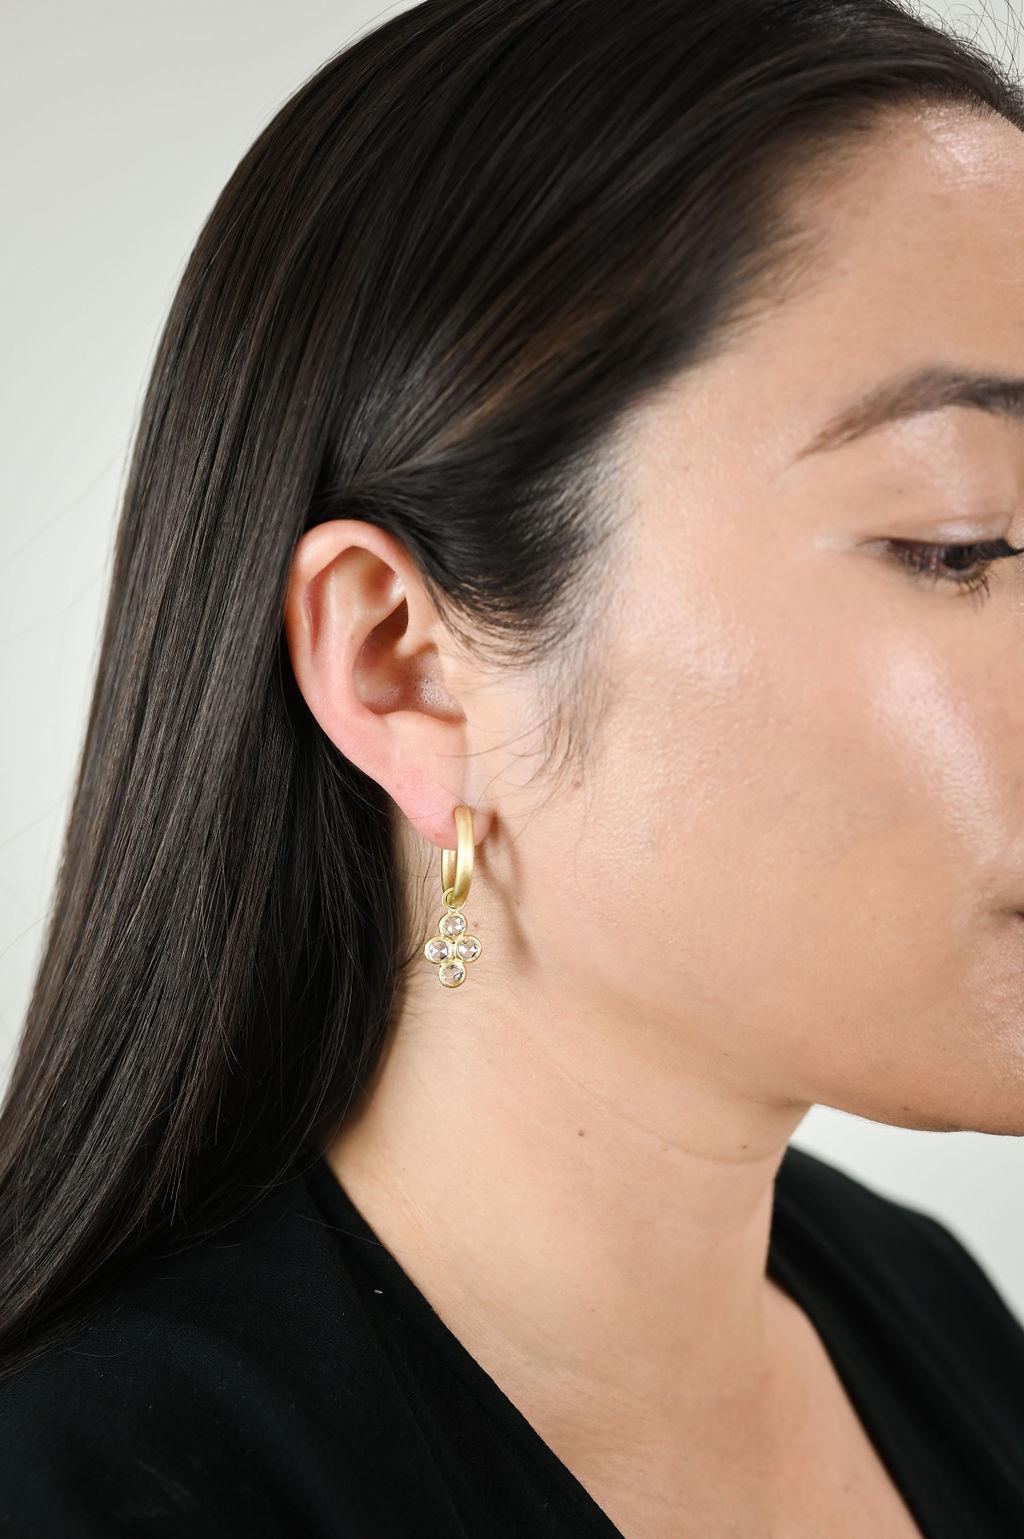 Faye Kim's 18 Karat Gold Hinged Burnished Diamond Hoops with Detachable White Diamond Drops - The hoops can be worn separately or reversed to show just the gold side. The drops can be attached to many of Faye's other hoops, allowing for mixing and